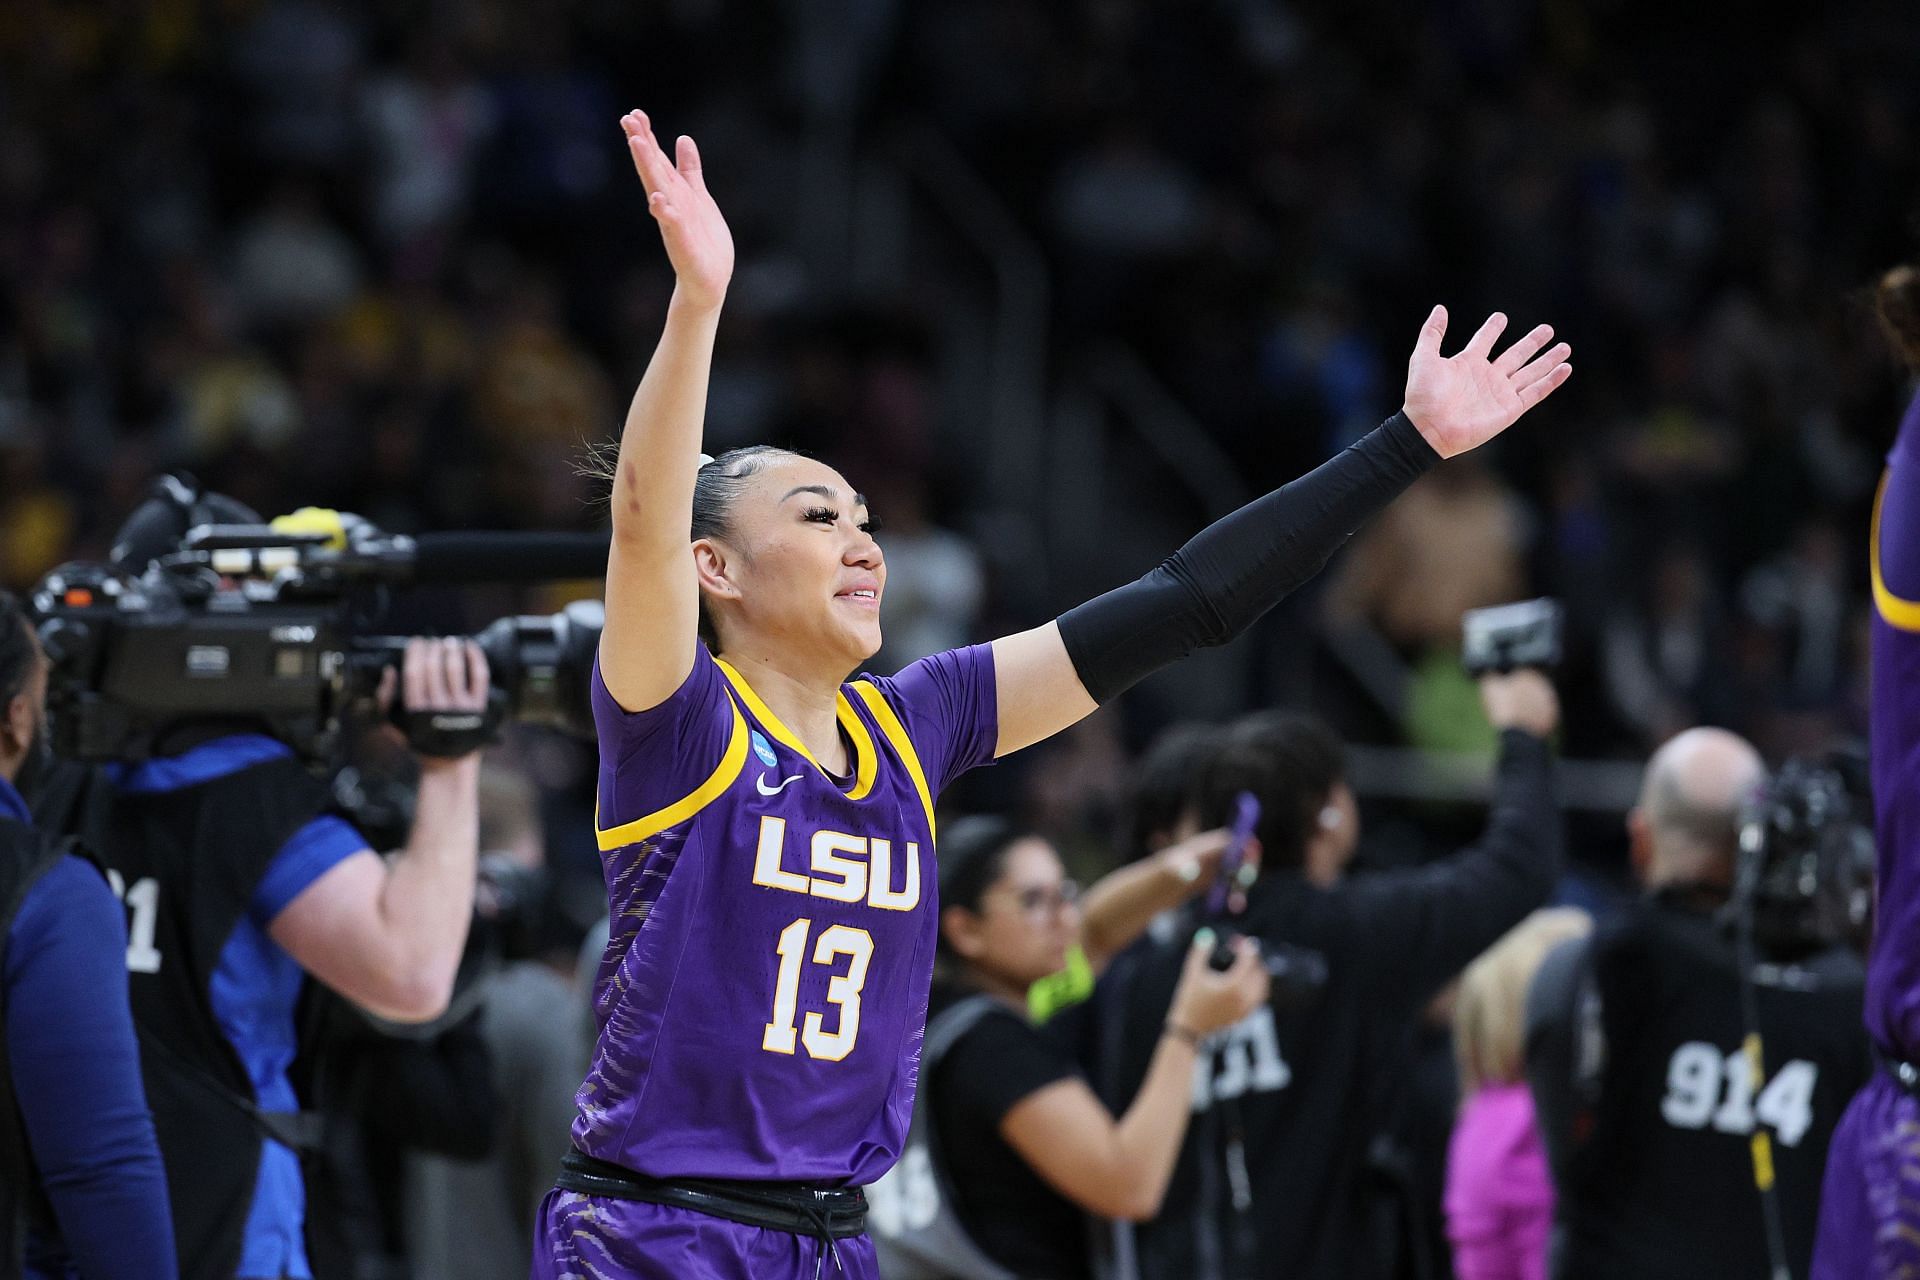 Poa averaged 4.9 ppg, 3.0 apg, 1.5 rpg and 1.1 spg in 36 games for LSU last season.